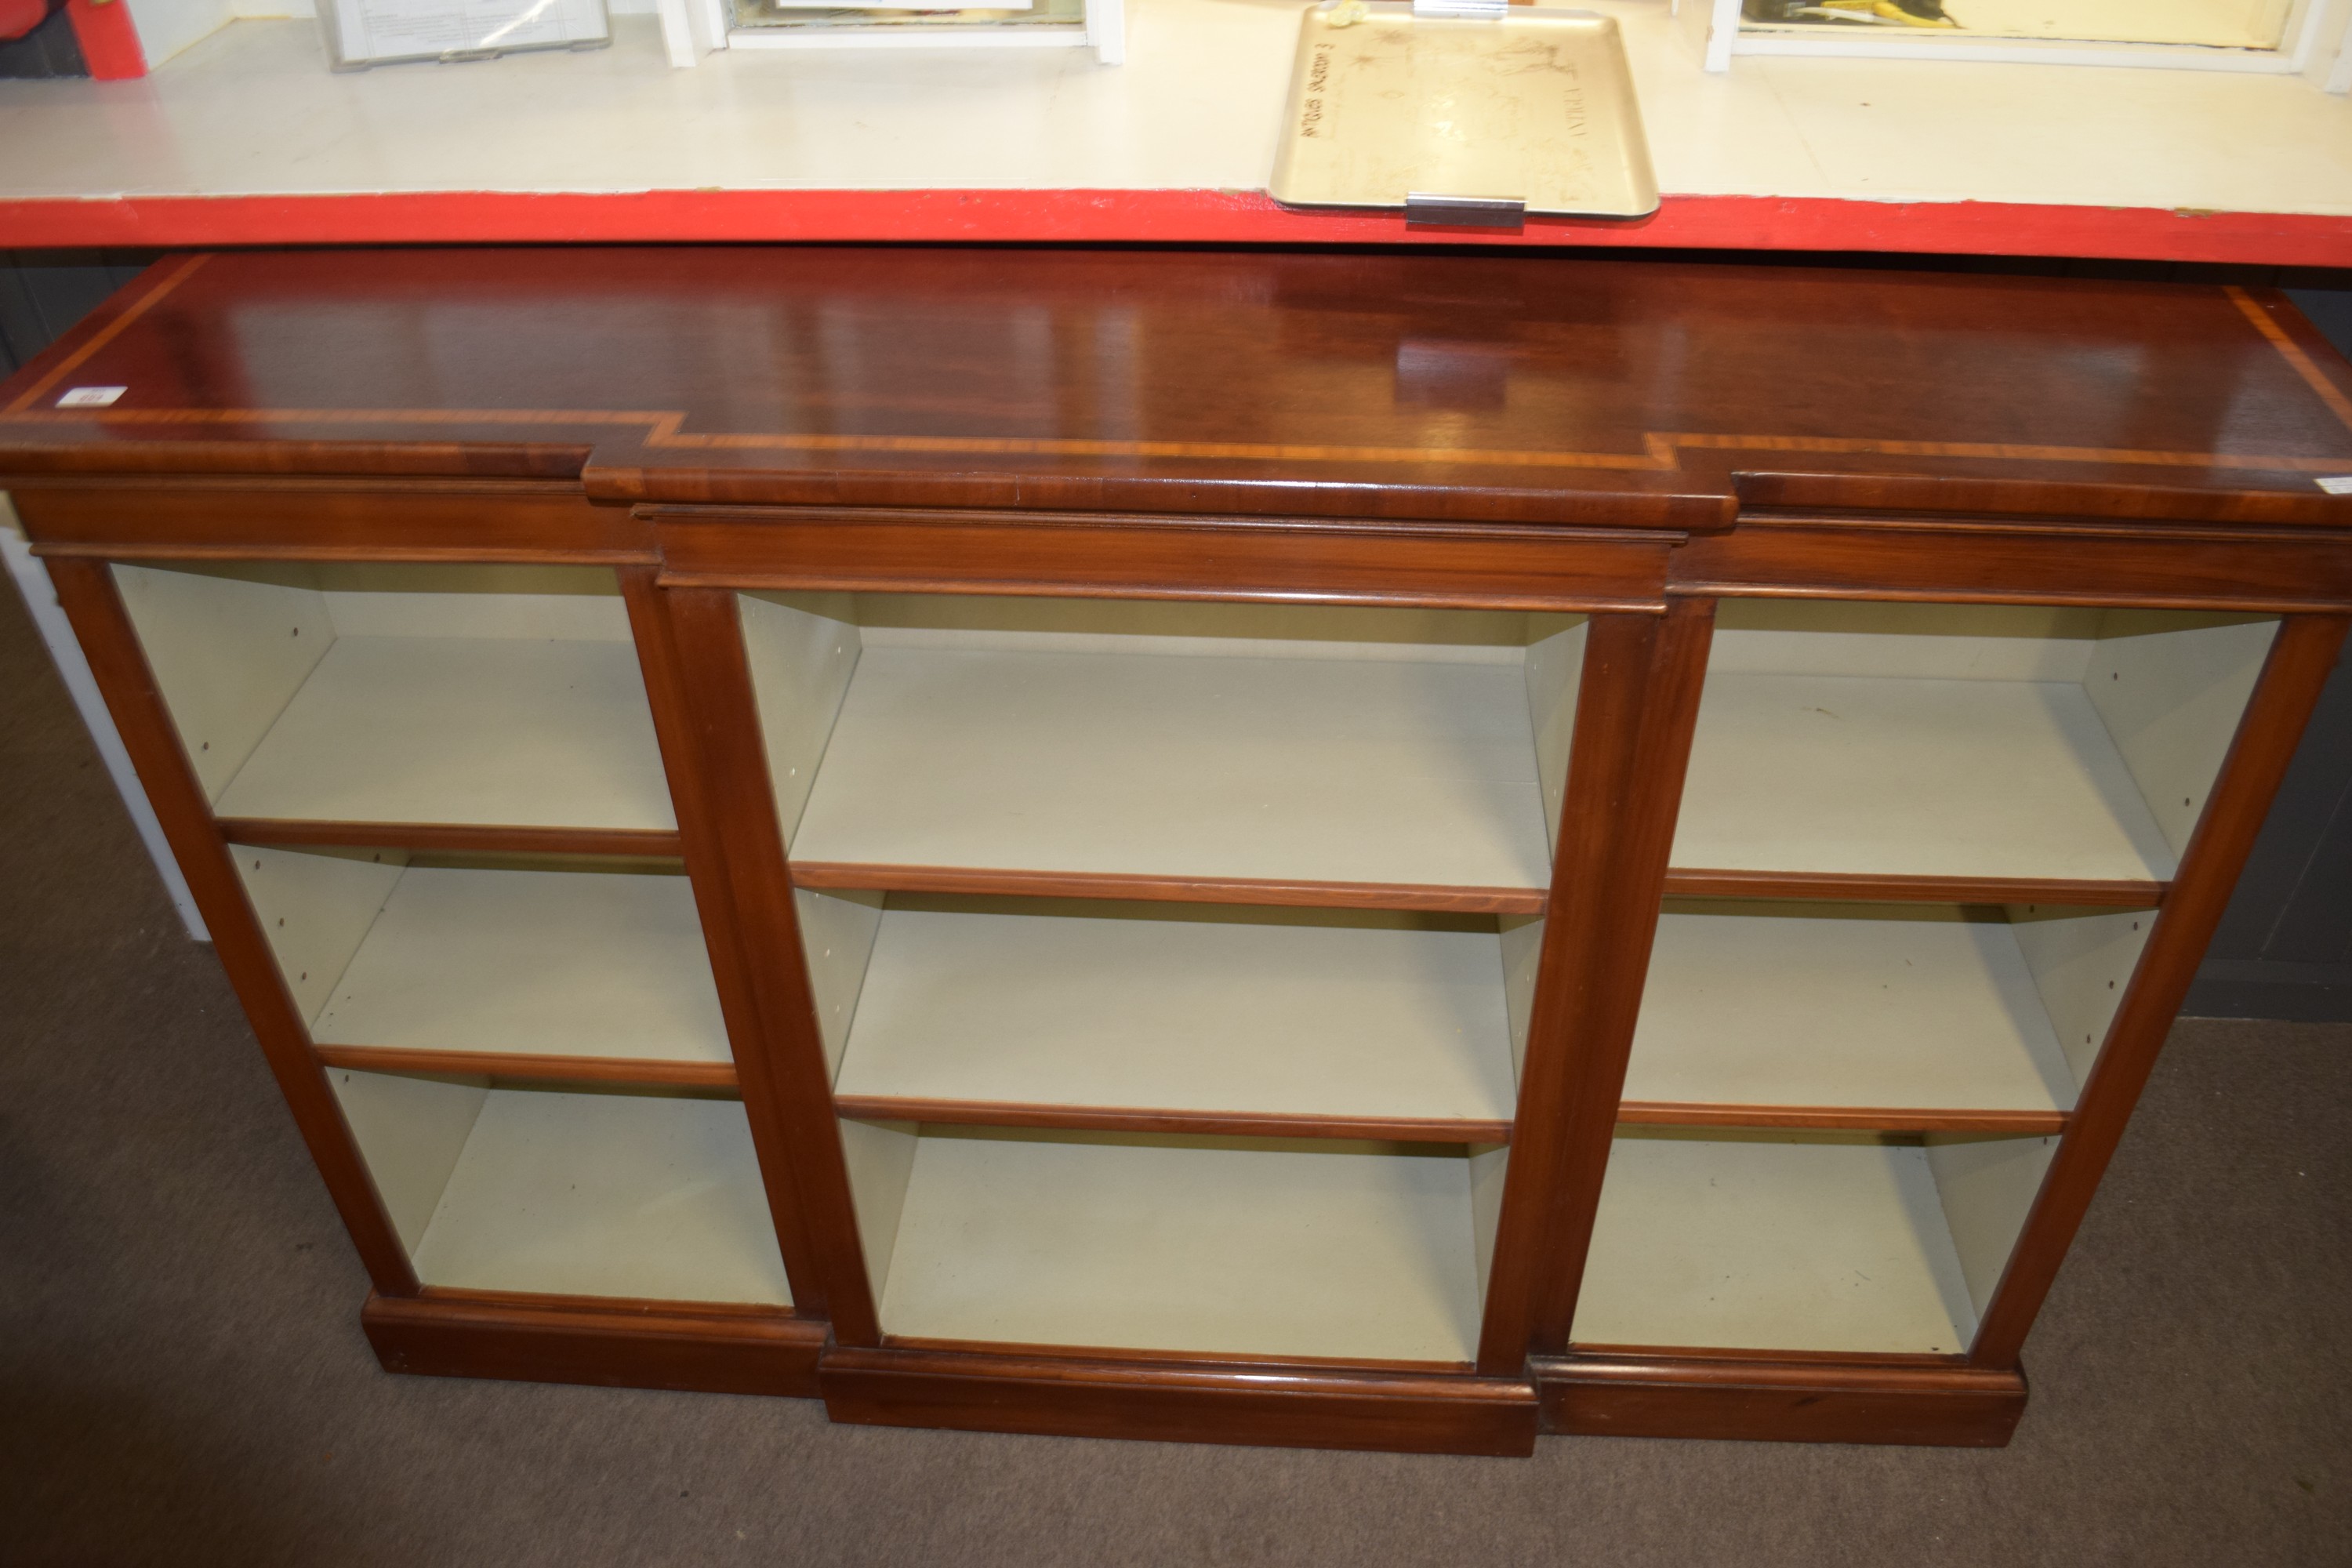 Good quality reproduction mahogany effect break front bookcase with strung and cross banded - Image 2 of 3